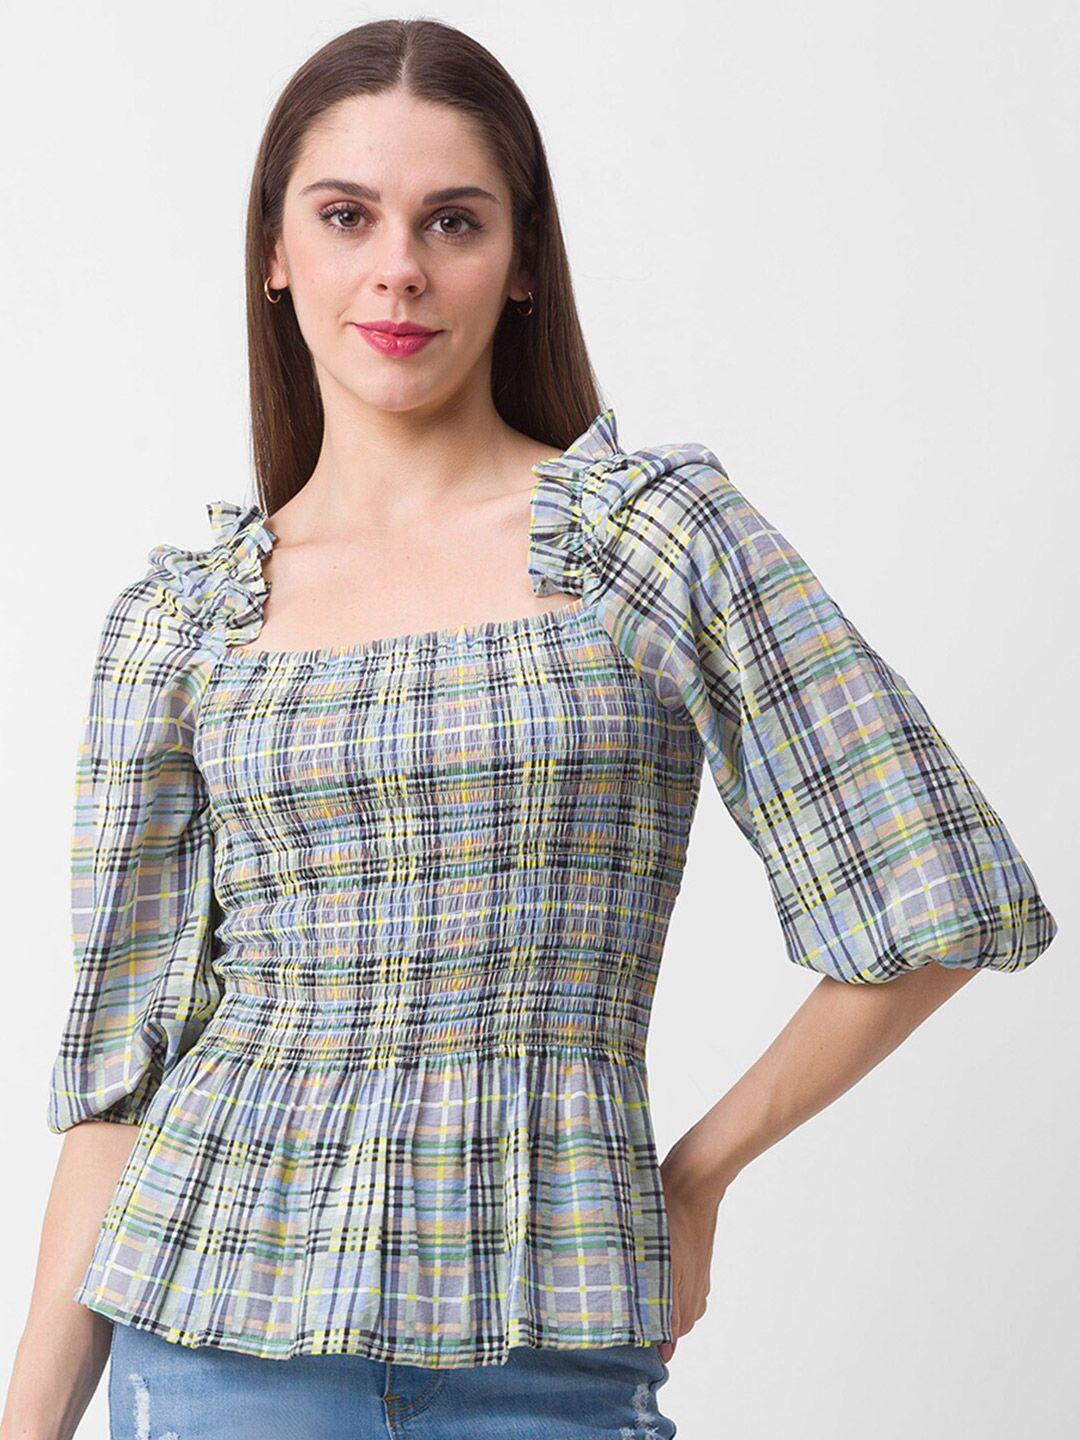 globus-grey-&-blue-checked-cinched-waist-top